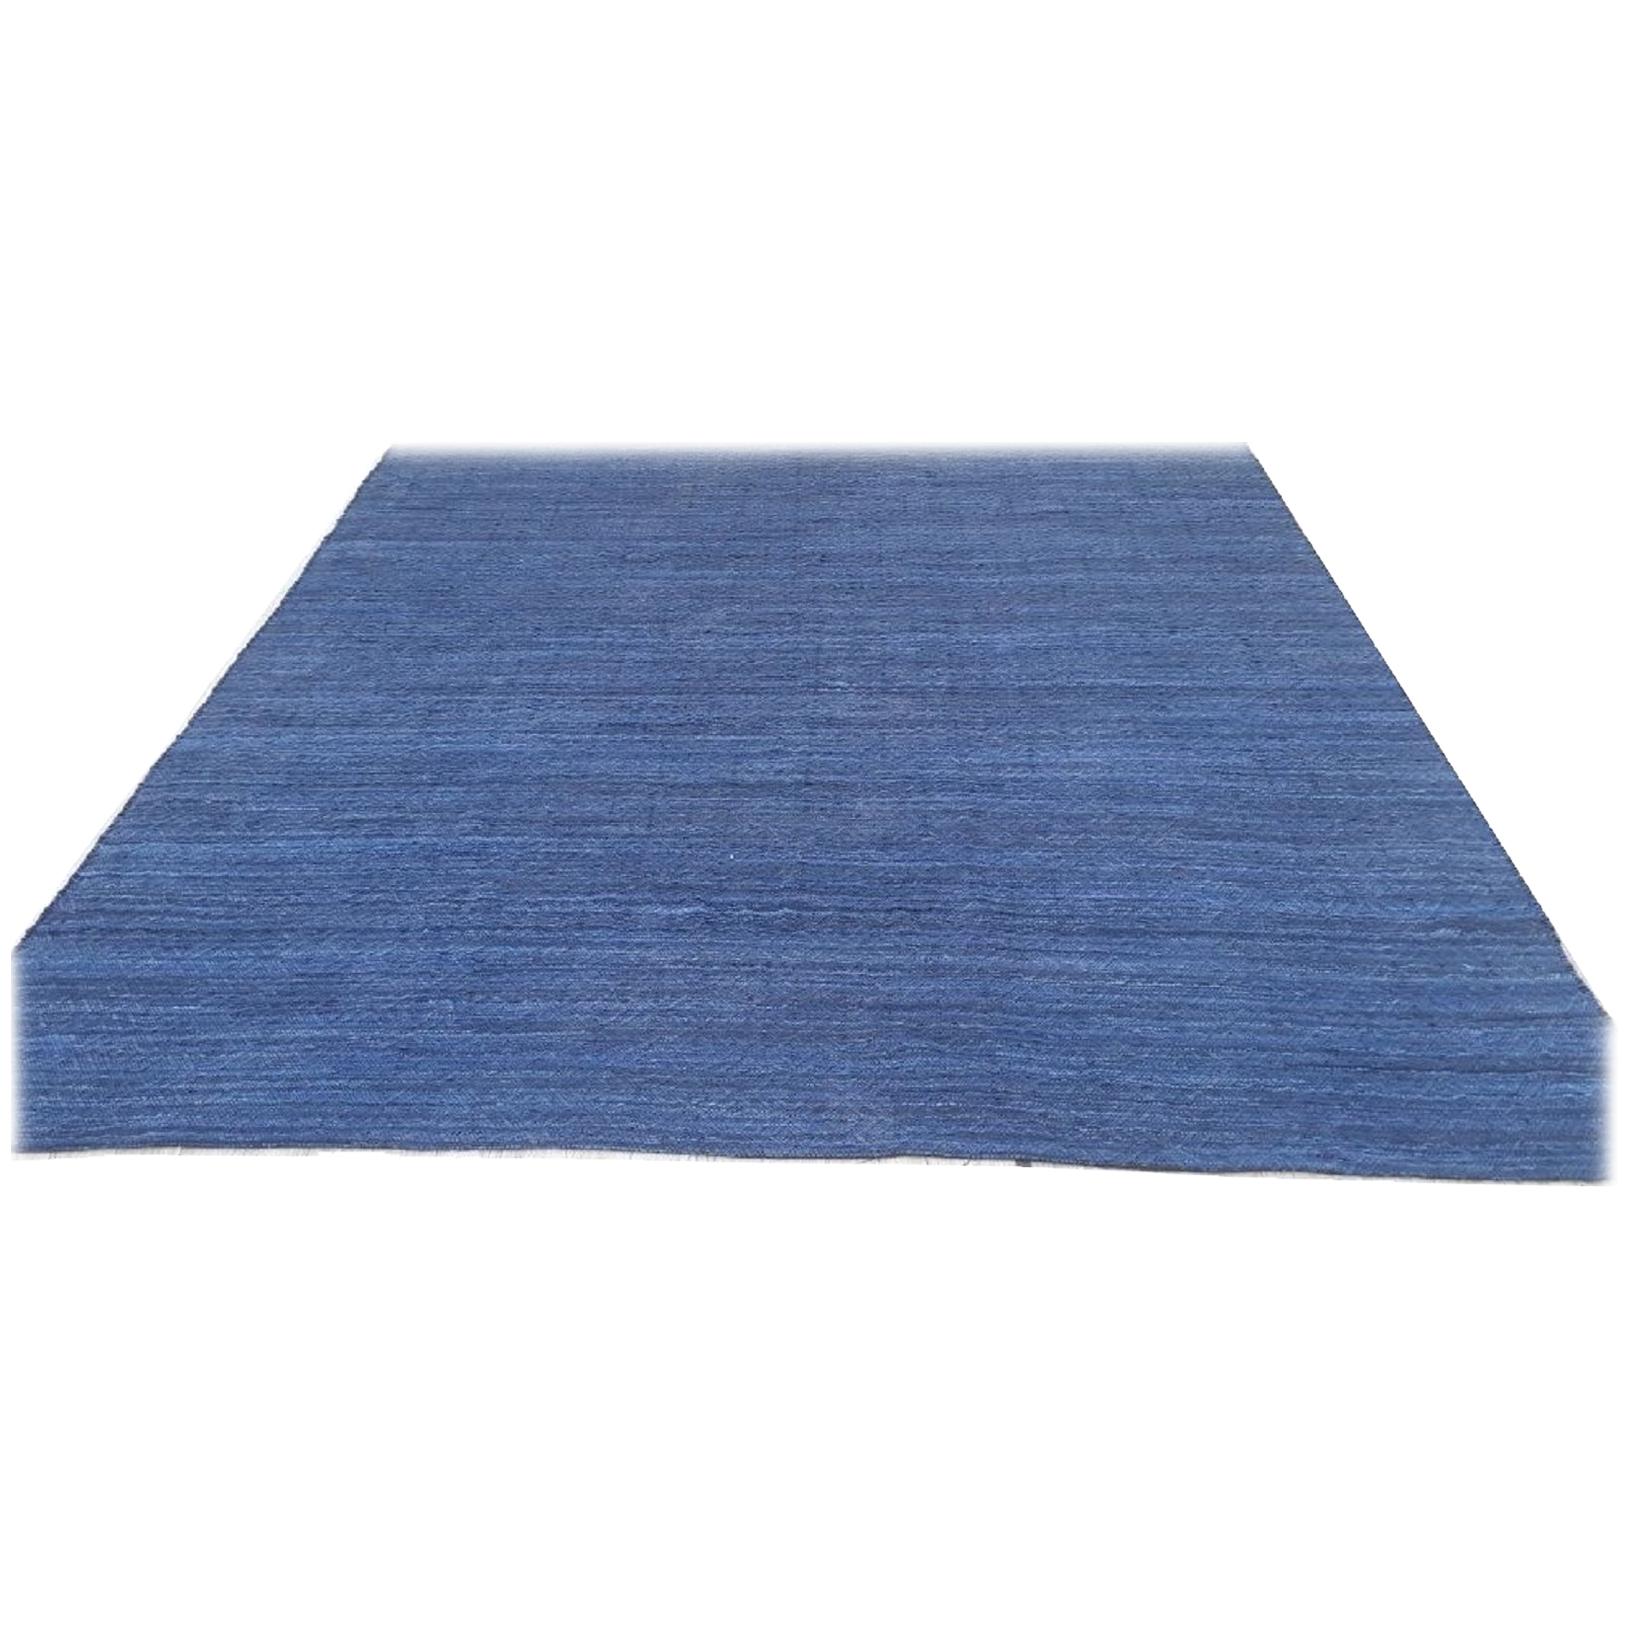 Collection: Larruzko
Design: Cuero (Ciel)
Item: Rug or carpet
Size: Approximate (plus or minus a few inches)
Colors: Ciel, blue, indigo and denim (with subtle chocolate brown stitching)
Weave: Flat-woven
Composition: Up-cycled natural suede (from